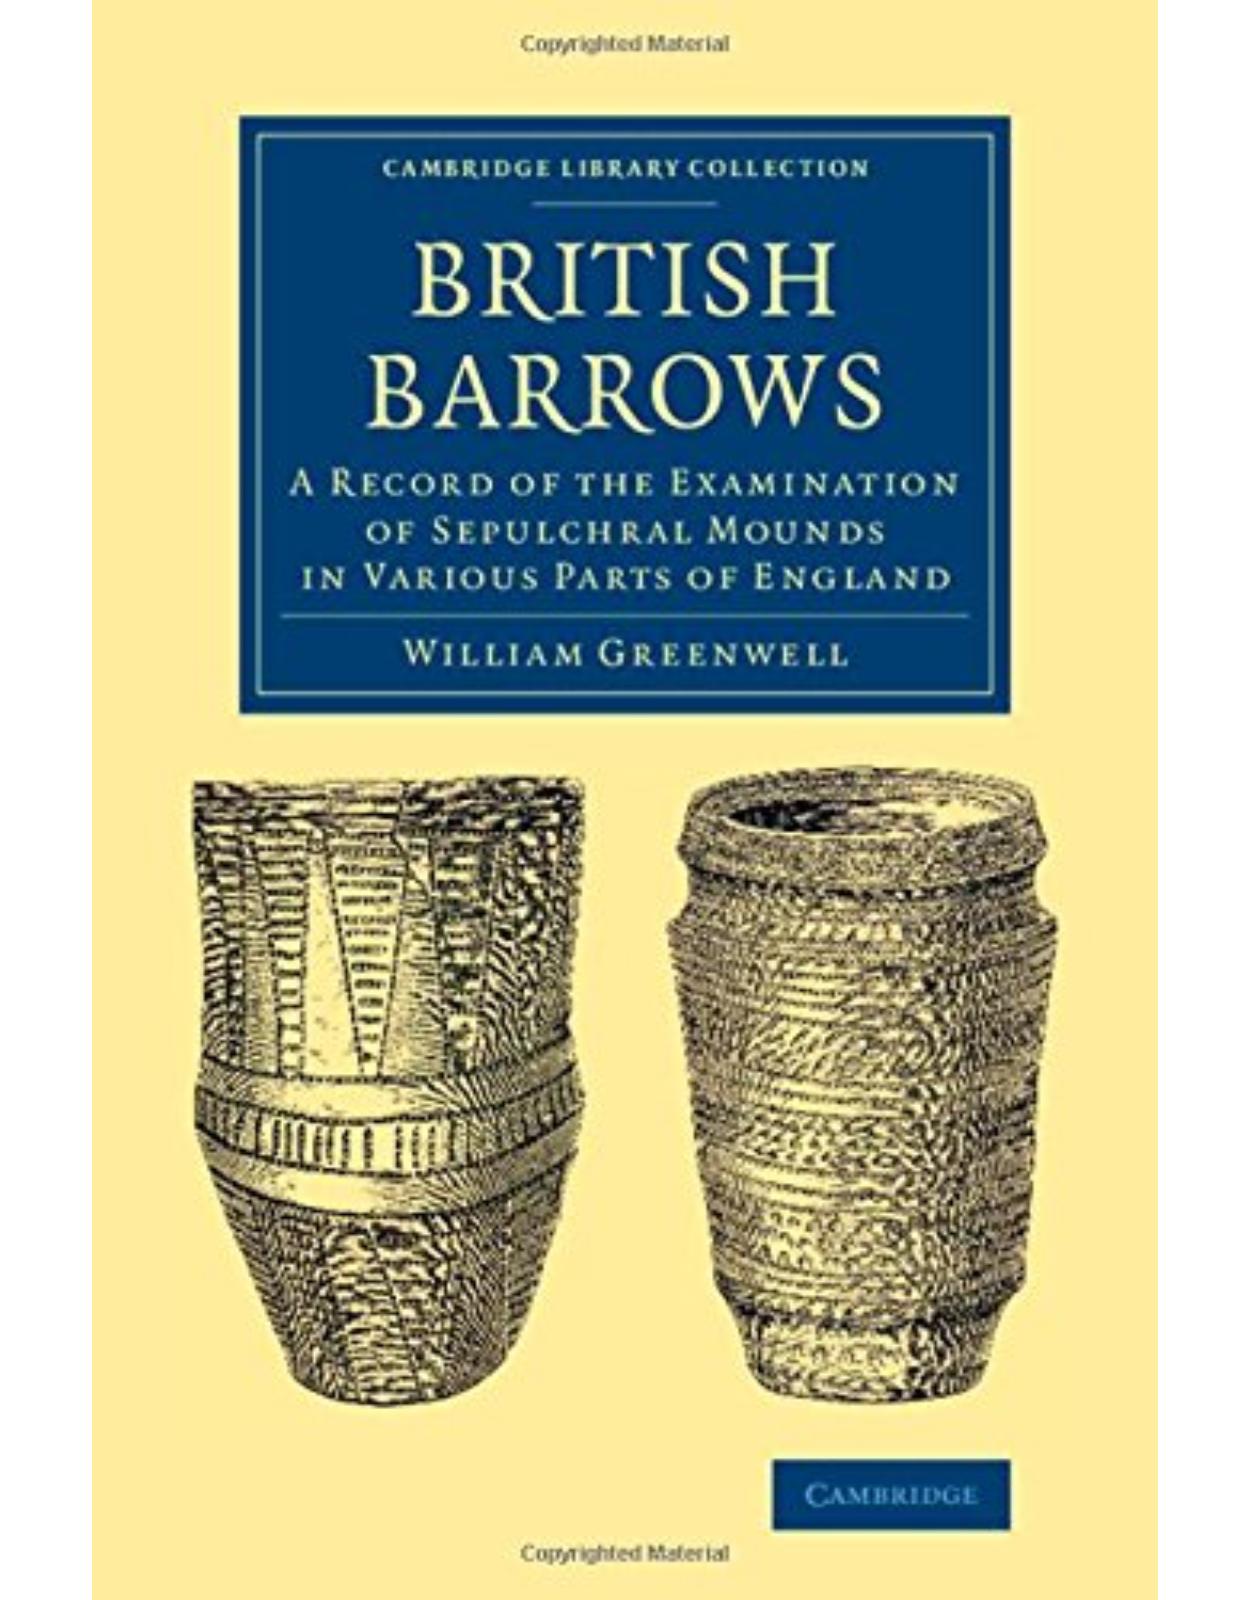 British Barrows: A Record of the Examination of Sepulchral Mounds in Various Parts of England (Cambridge Library Collection - Archaeology)